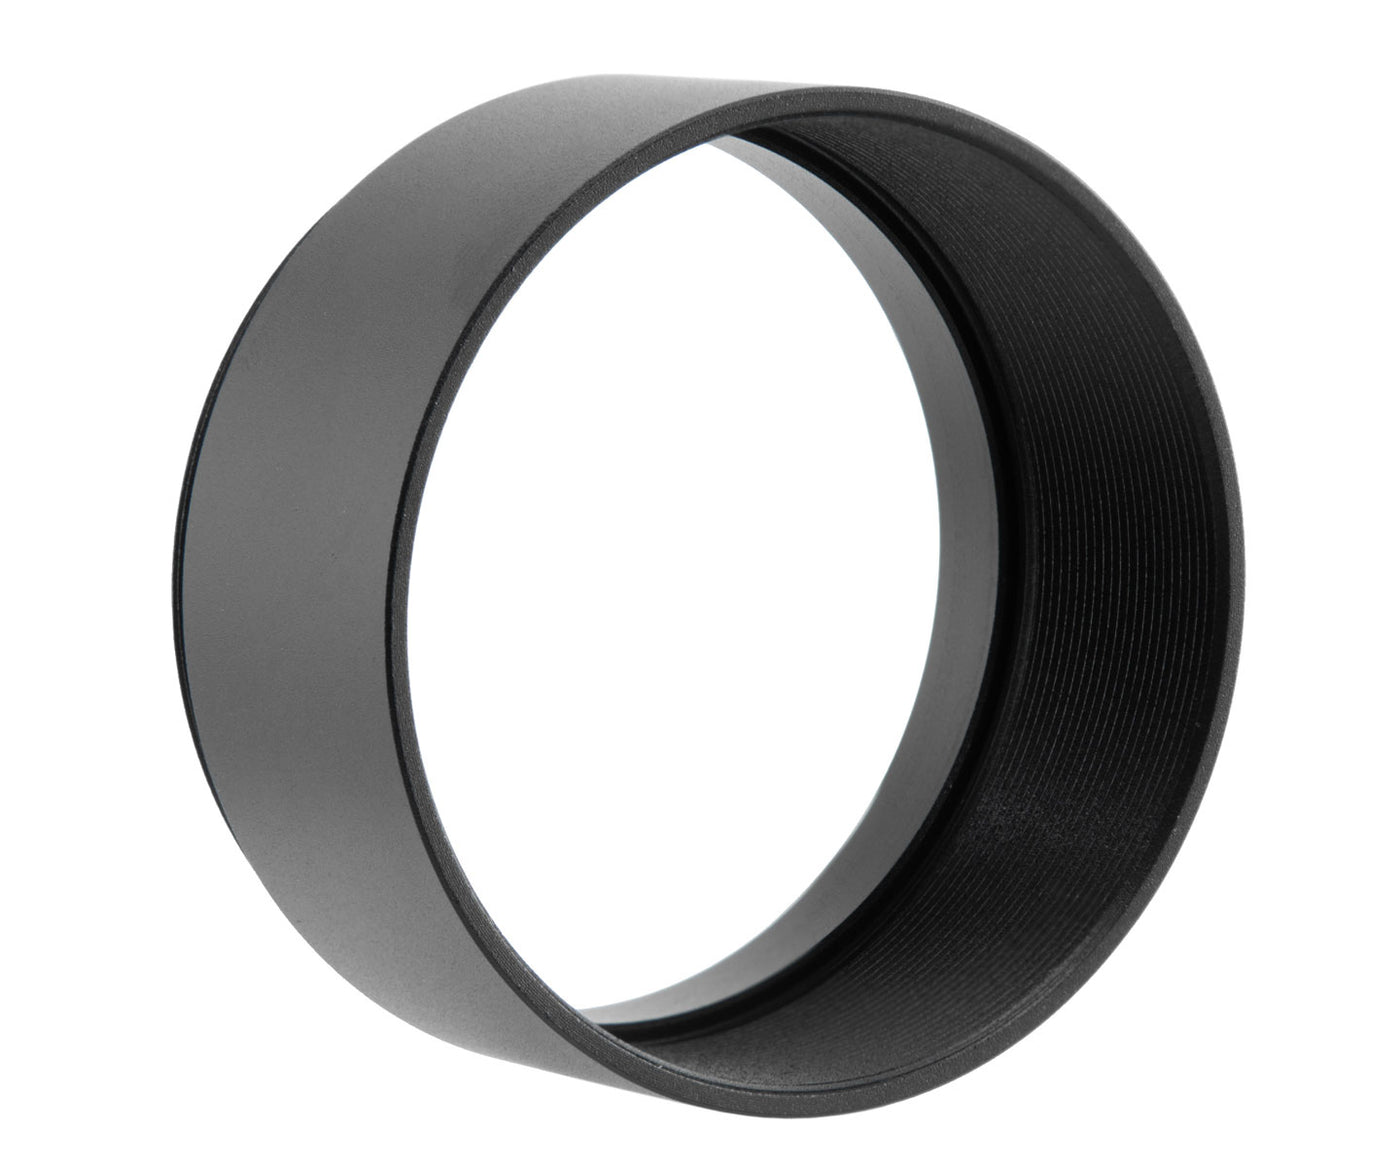 M48 Extension Ring (2") - 30mm